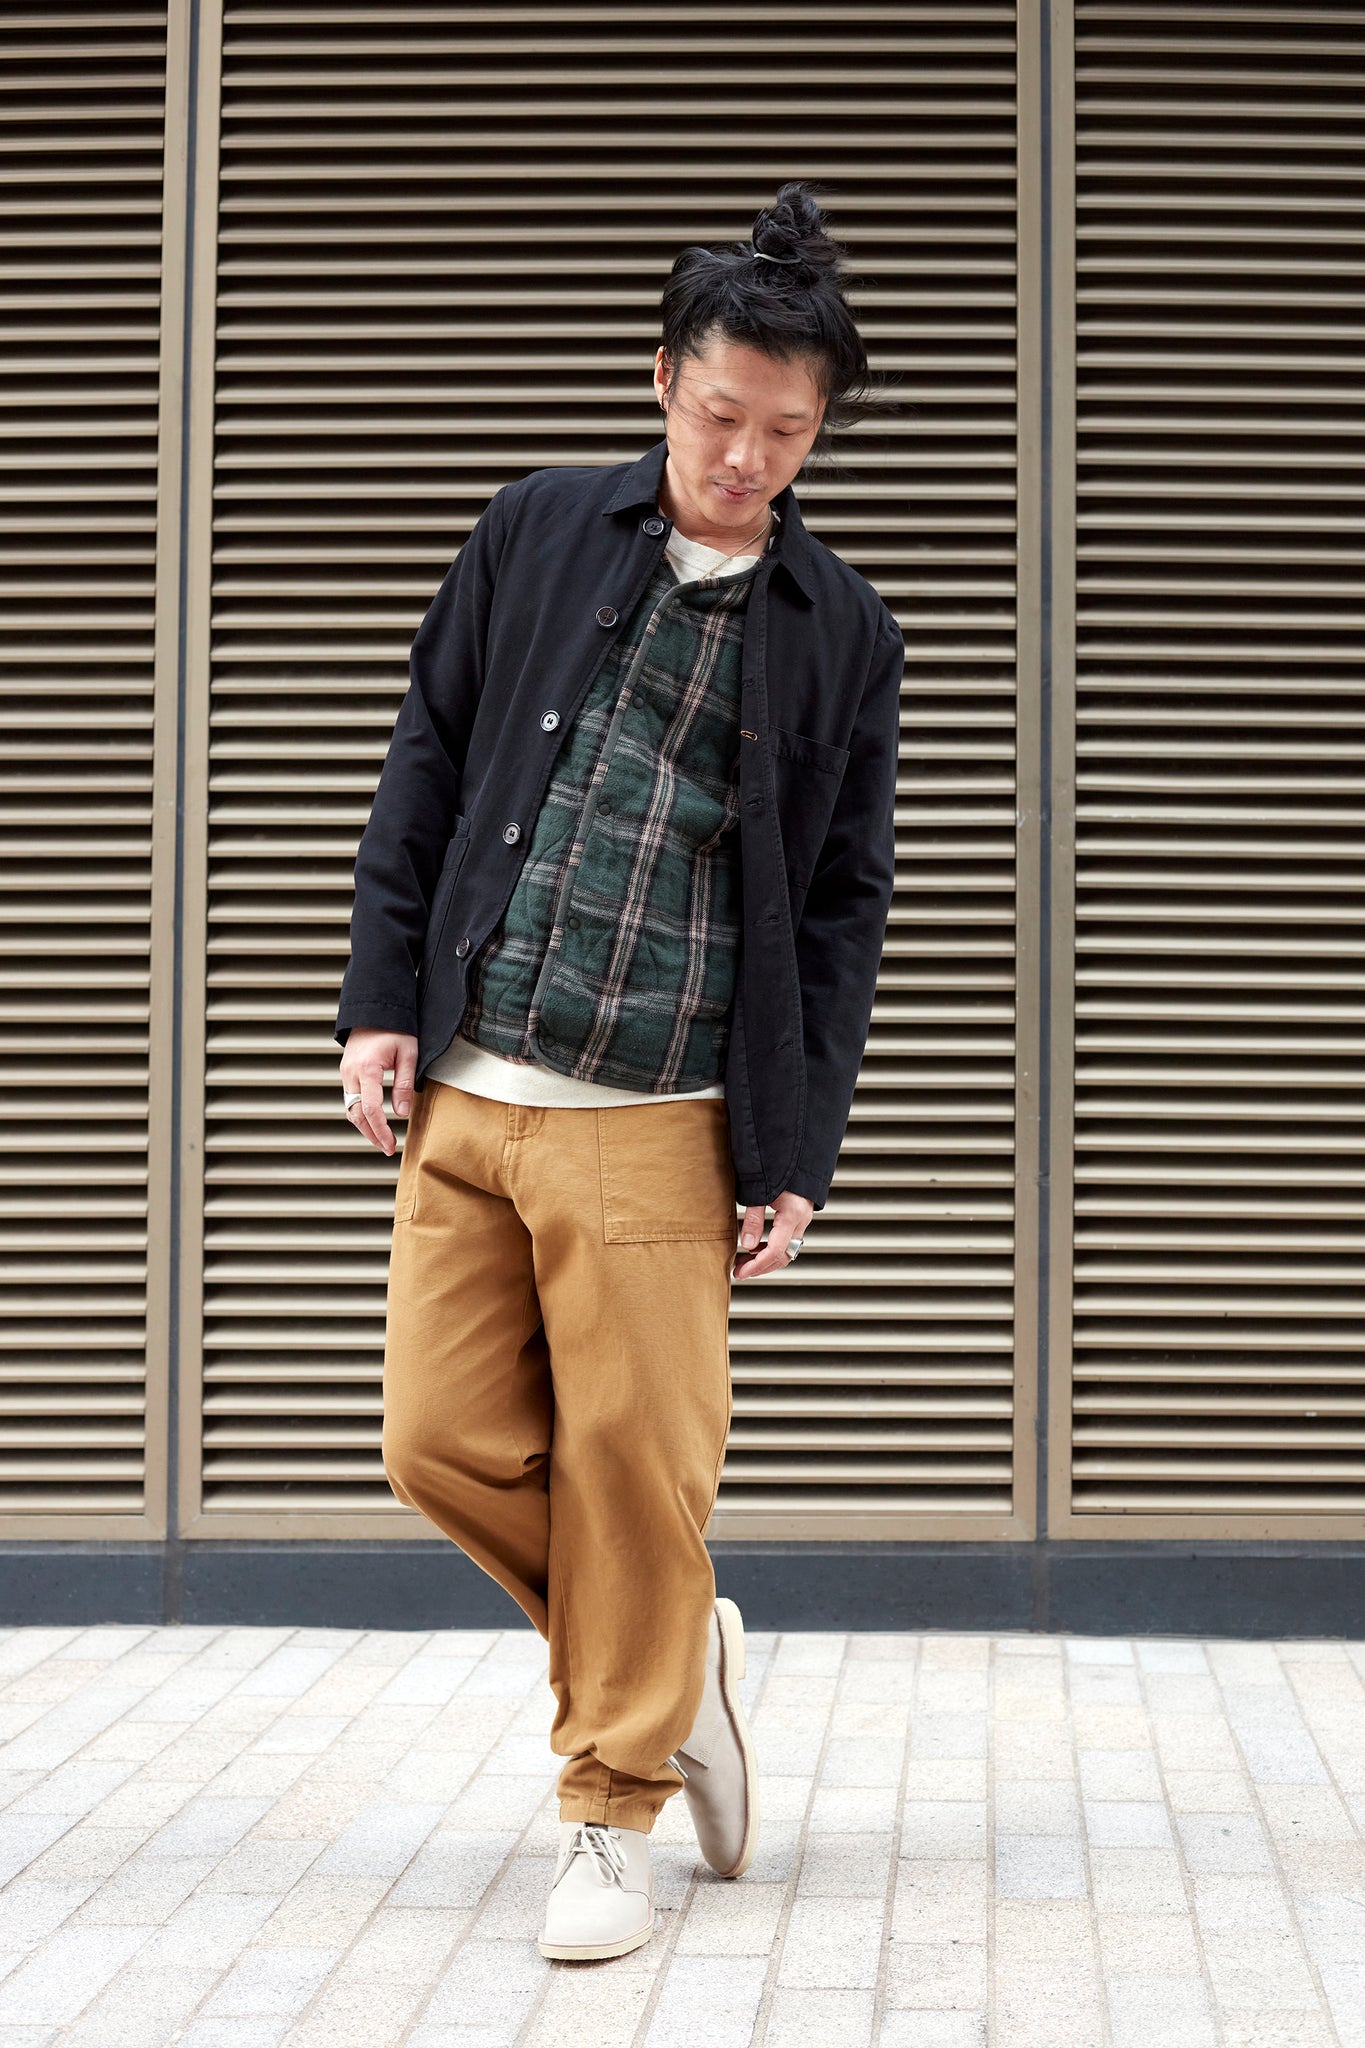 Hardwearing military style fatigue pants and Universal Works X Sanders suede shoes